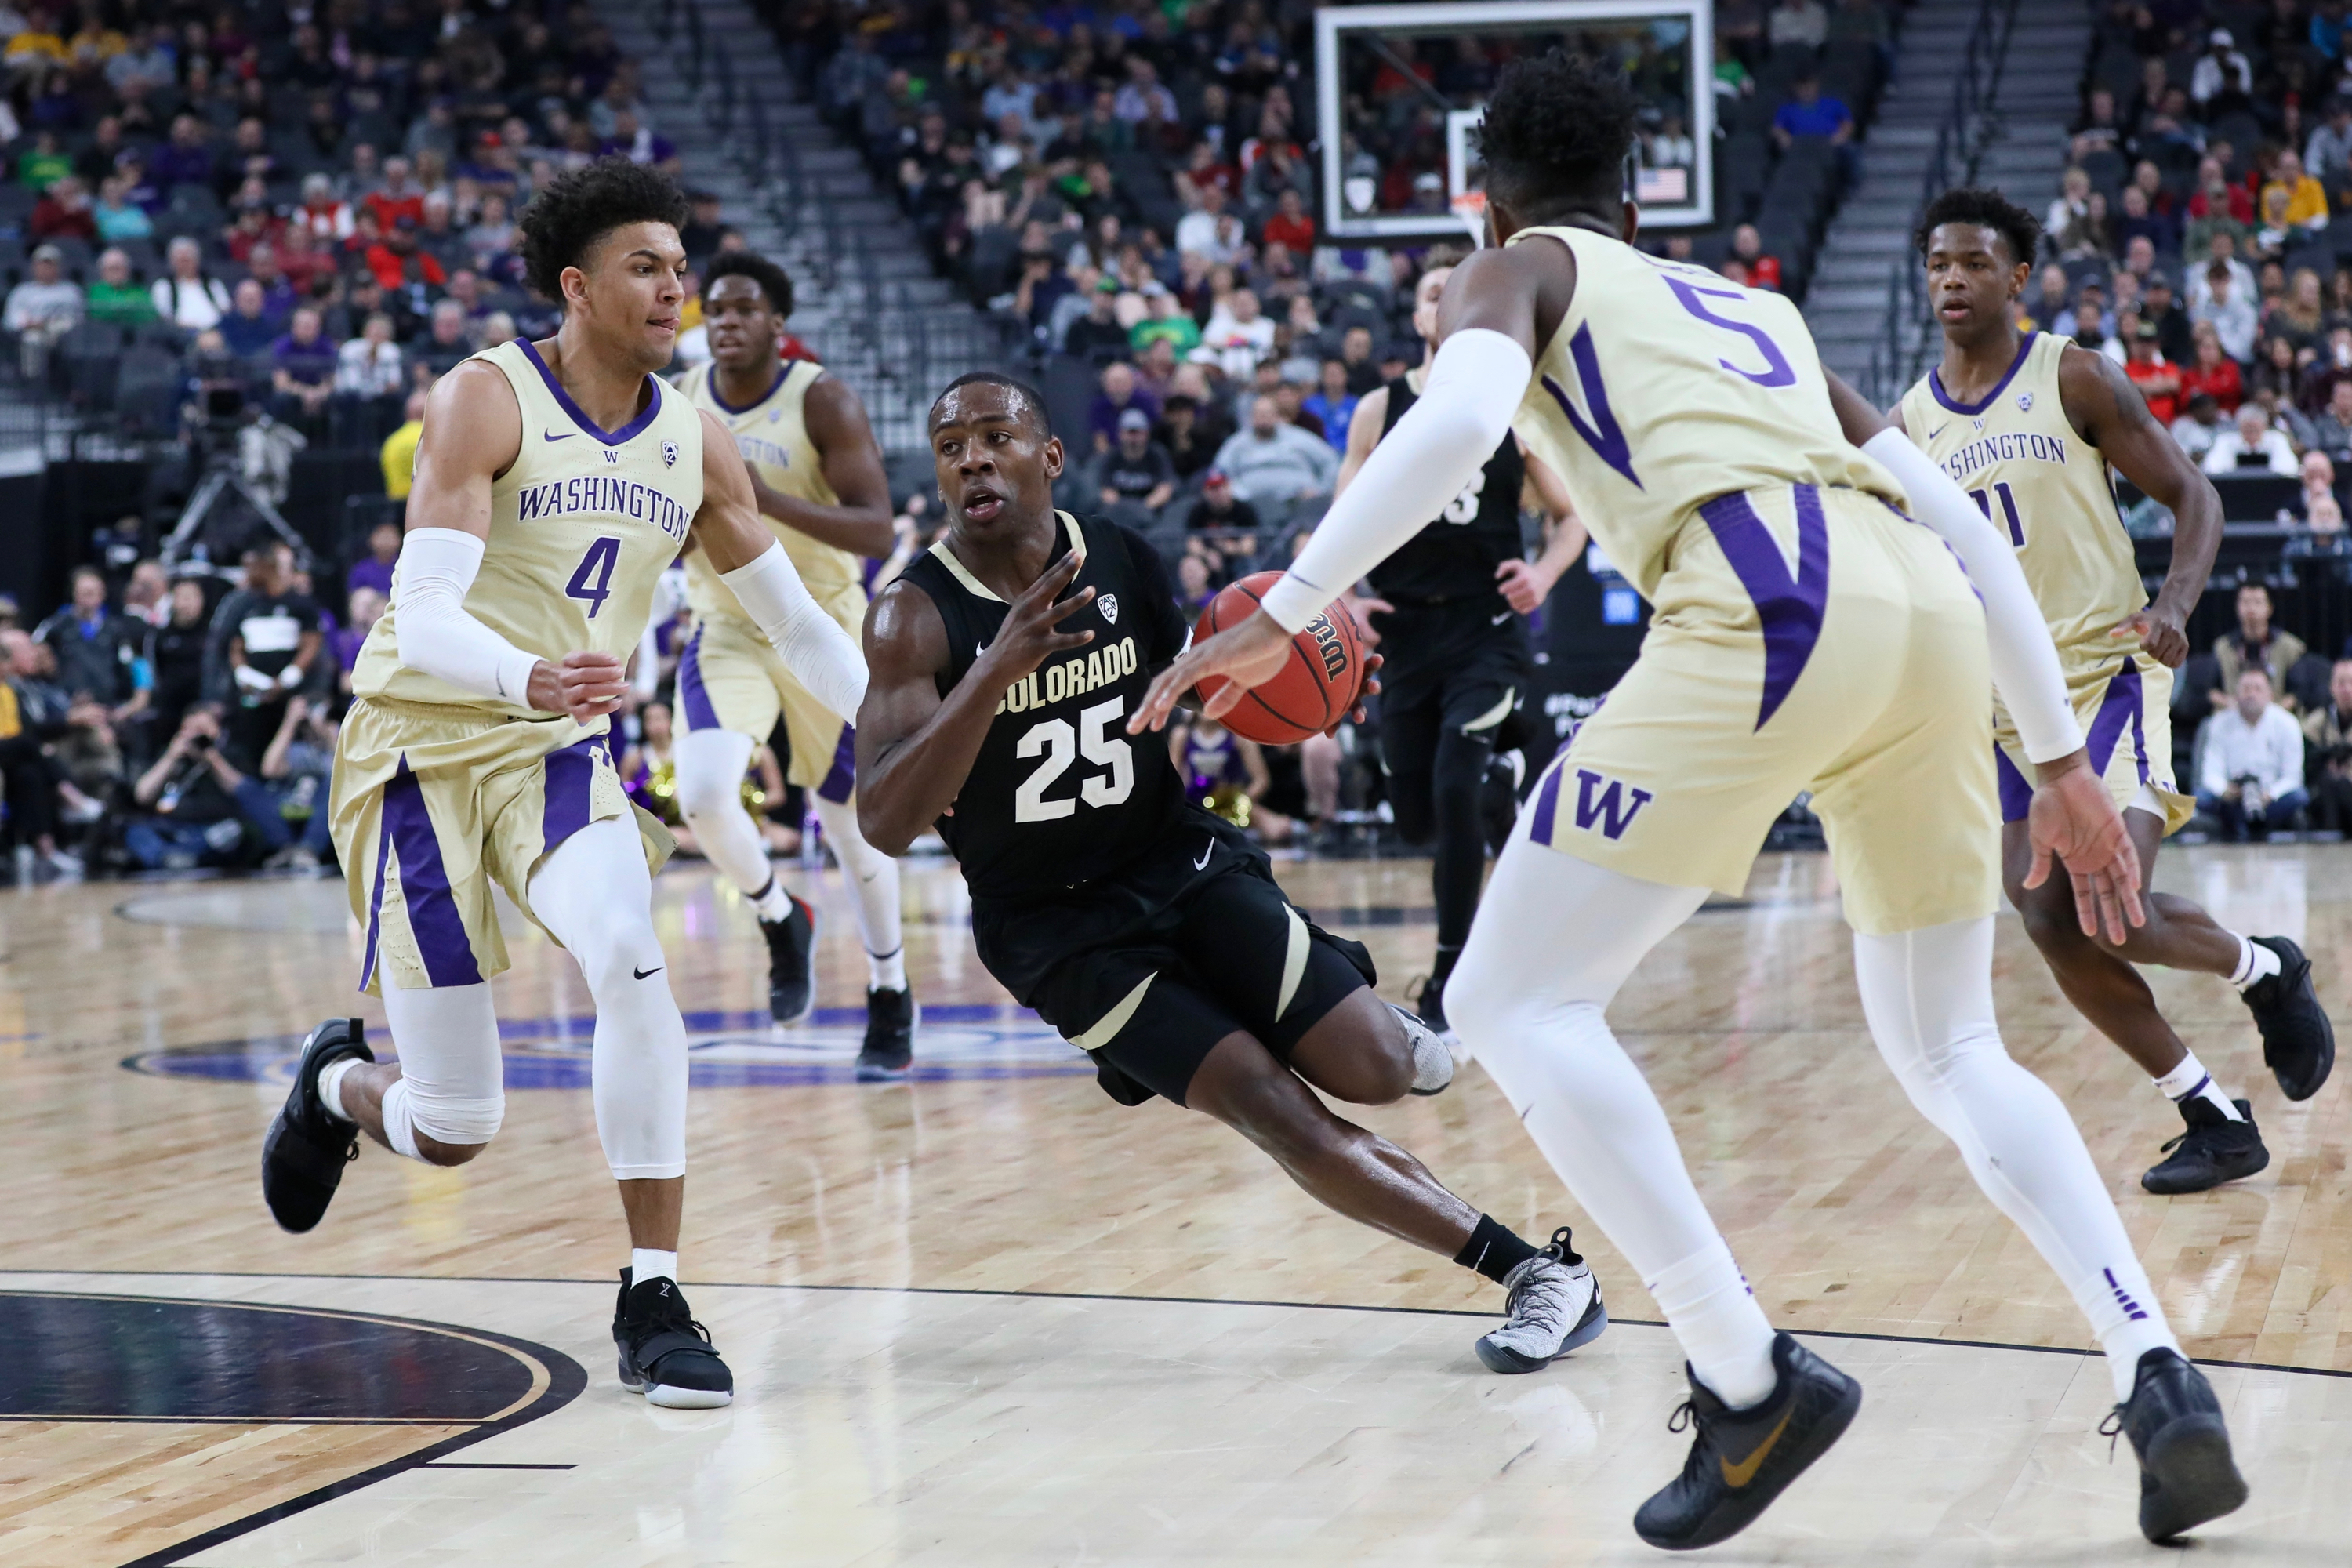 Ice-cold second half dooms Buffs in Pac-12 Tourney semis against UW